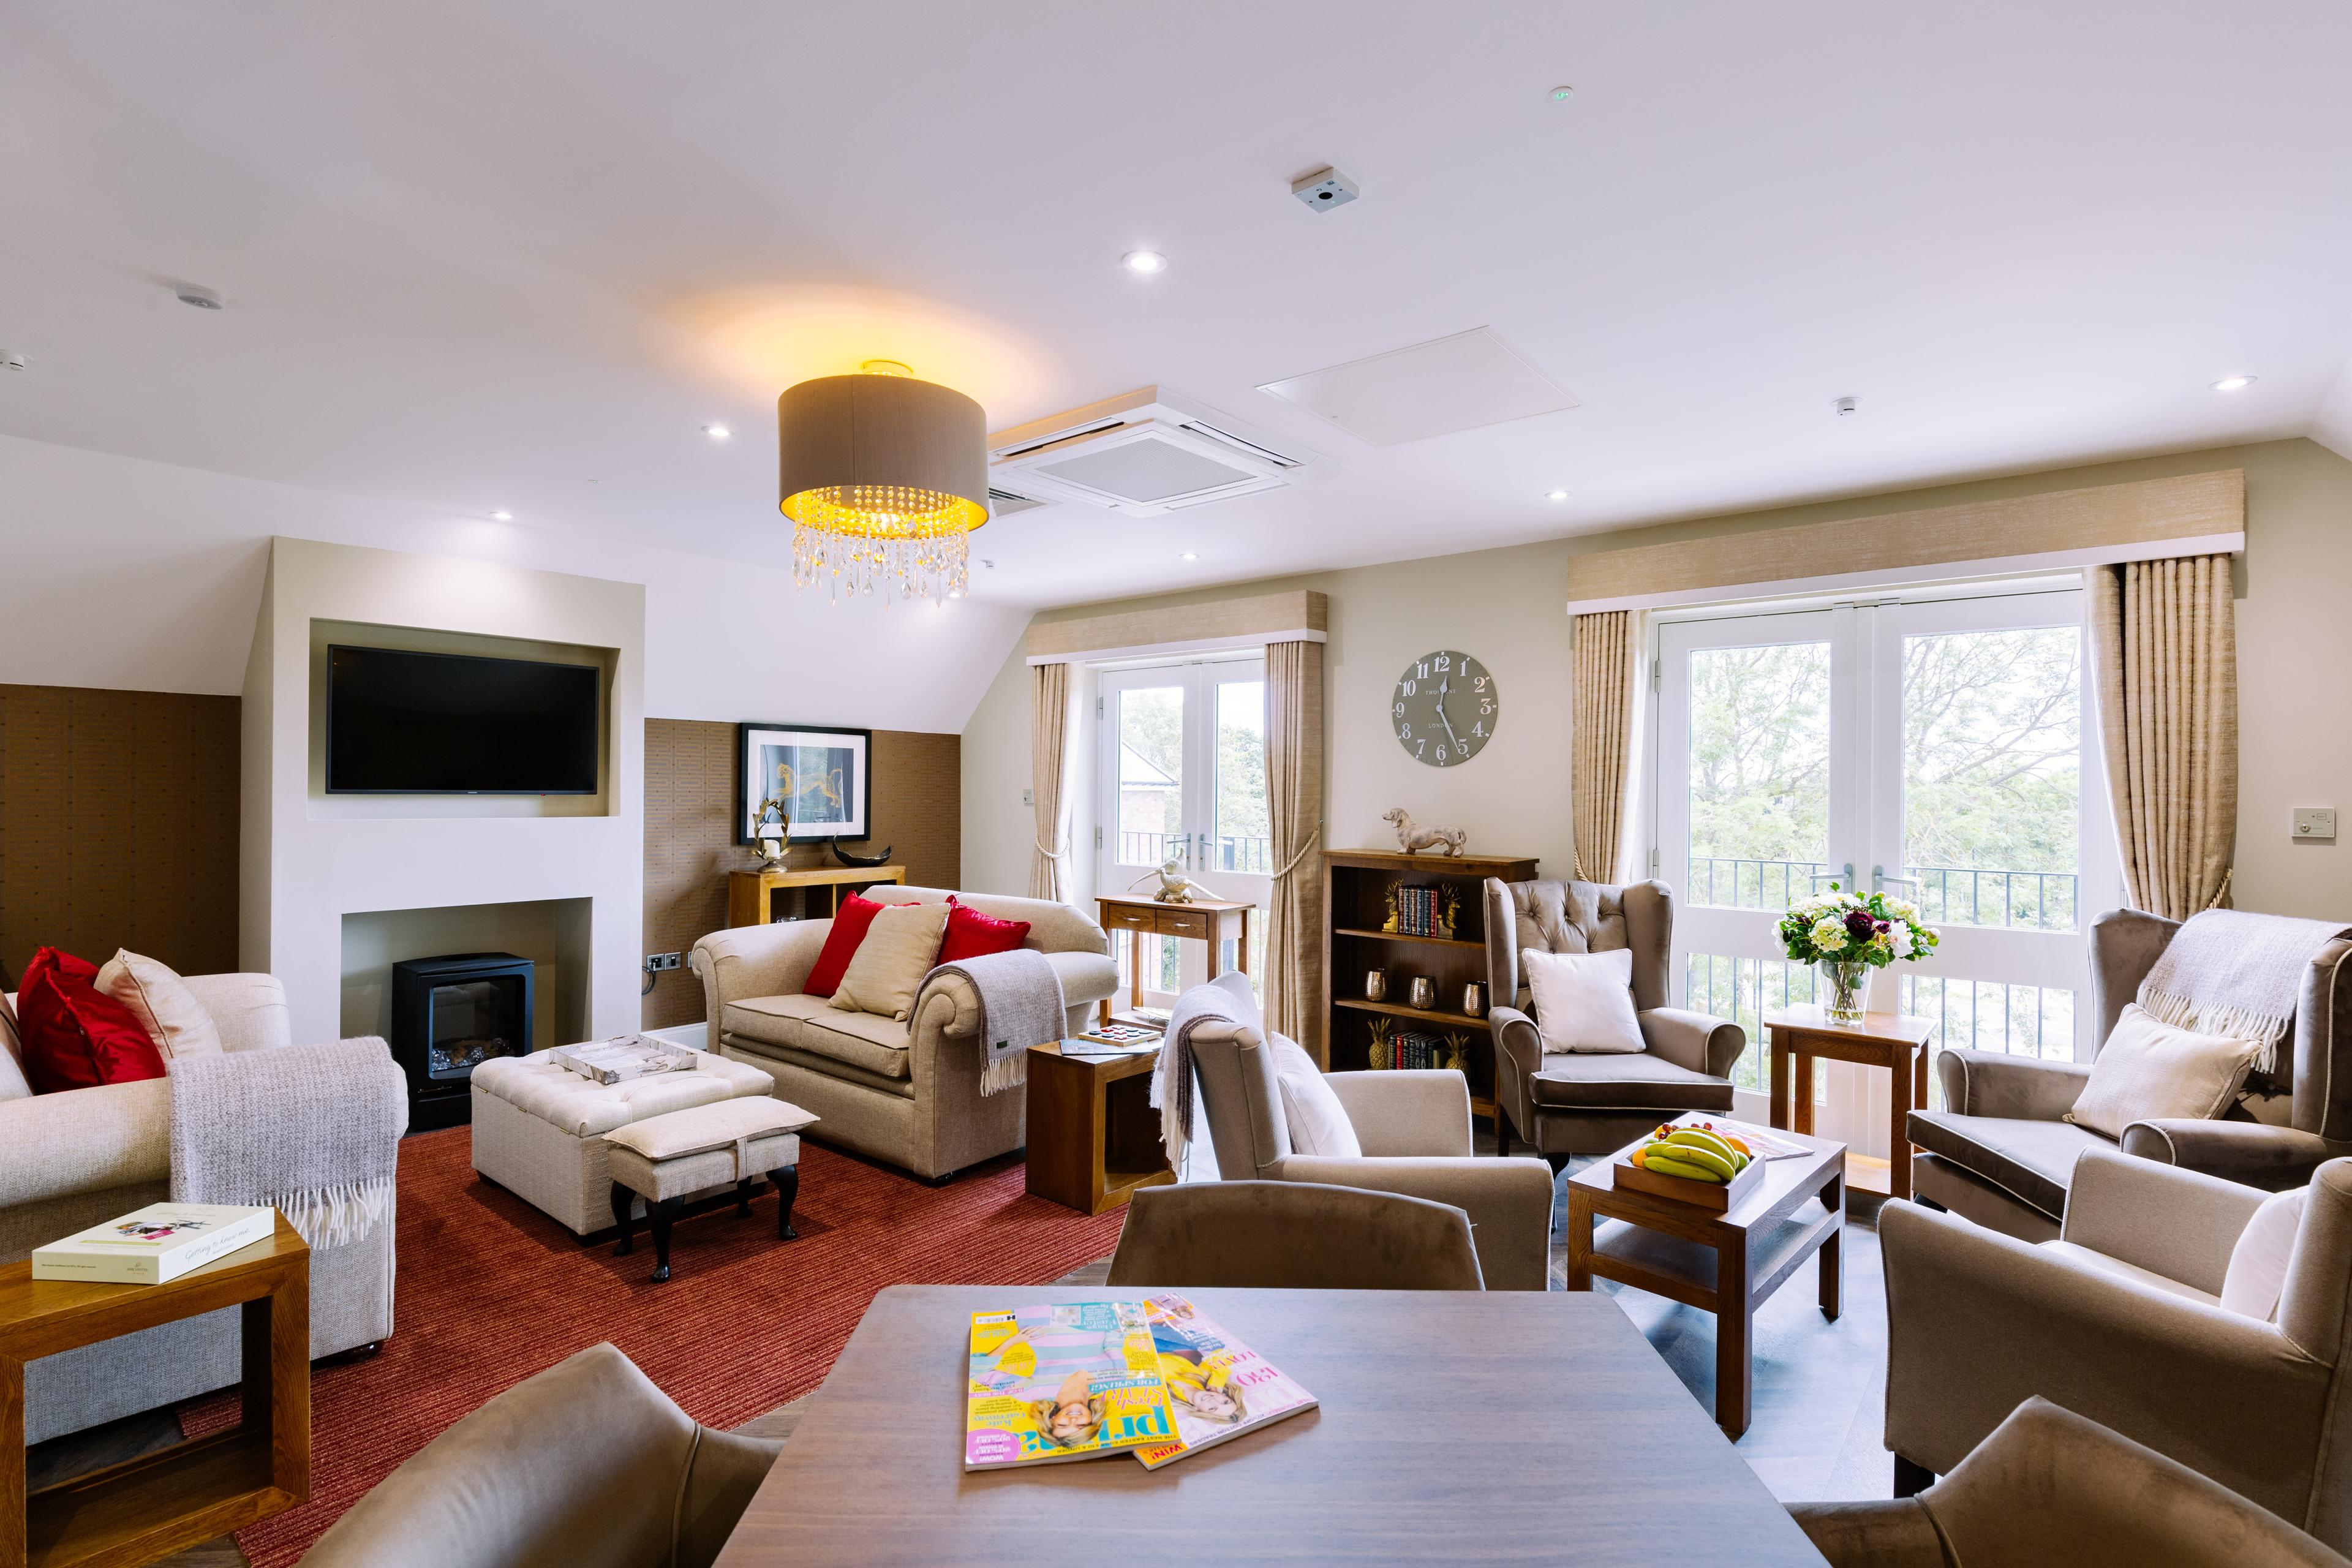 Shawford Springs Care Home